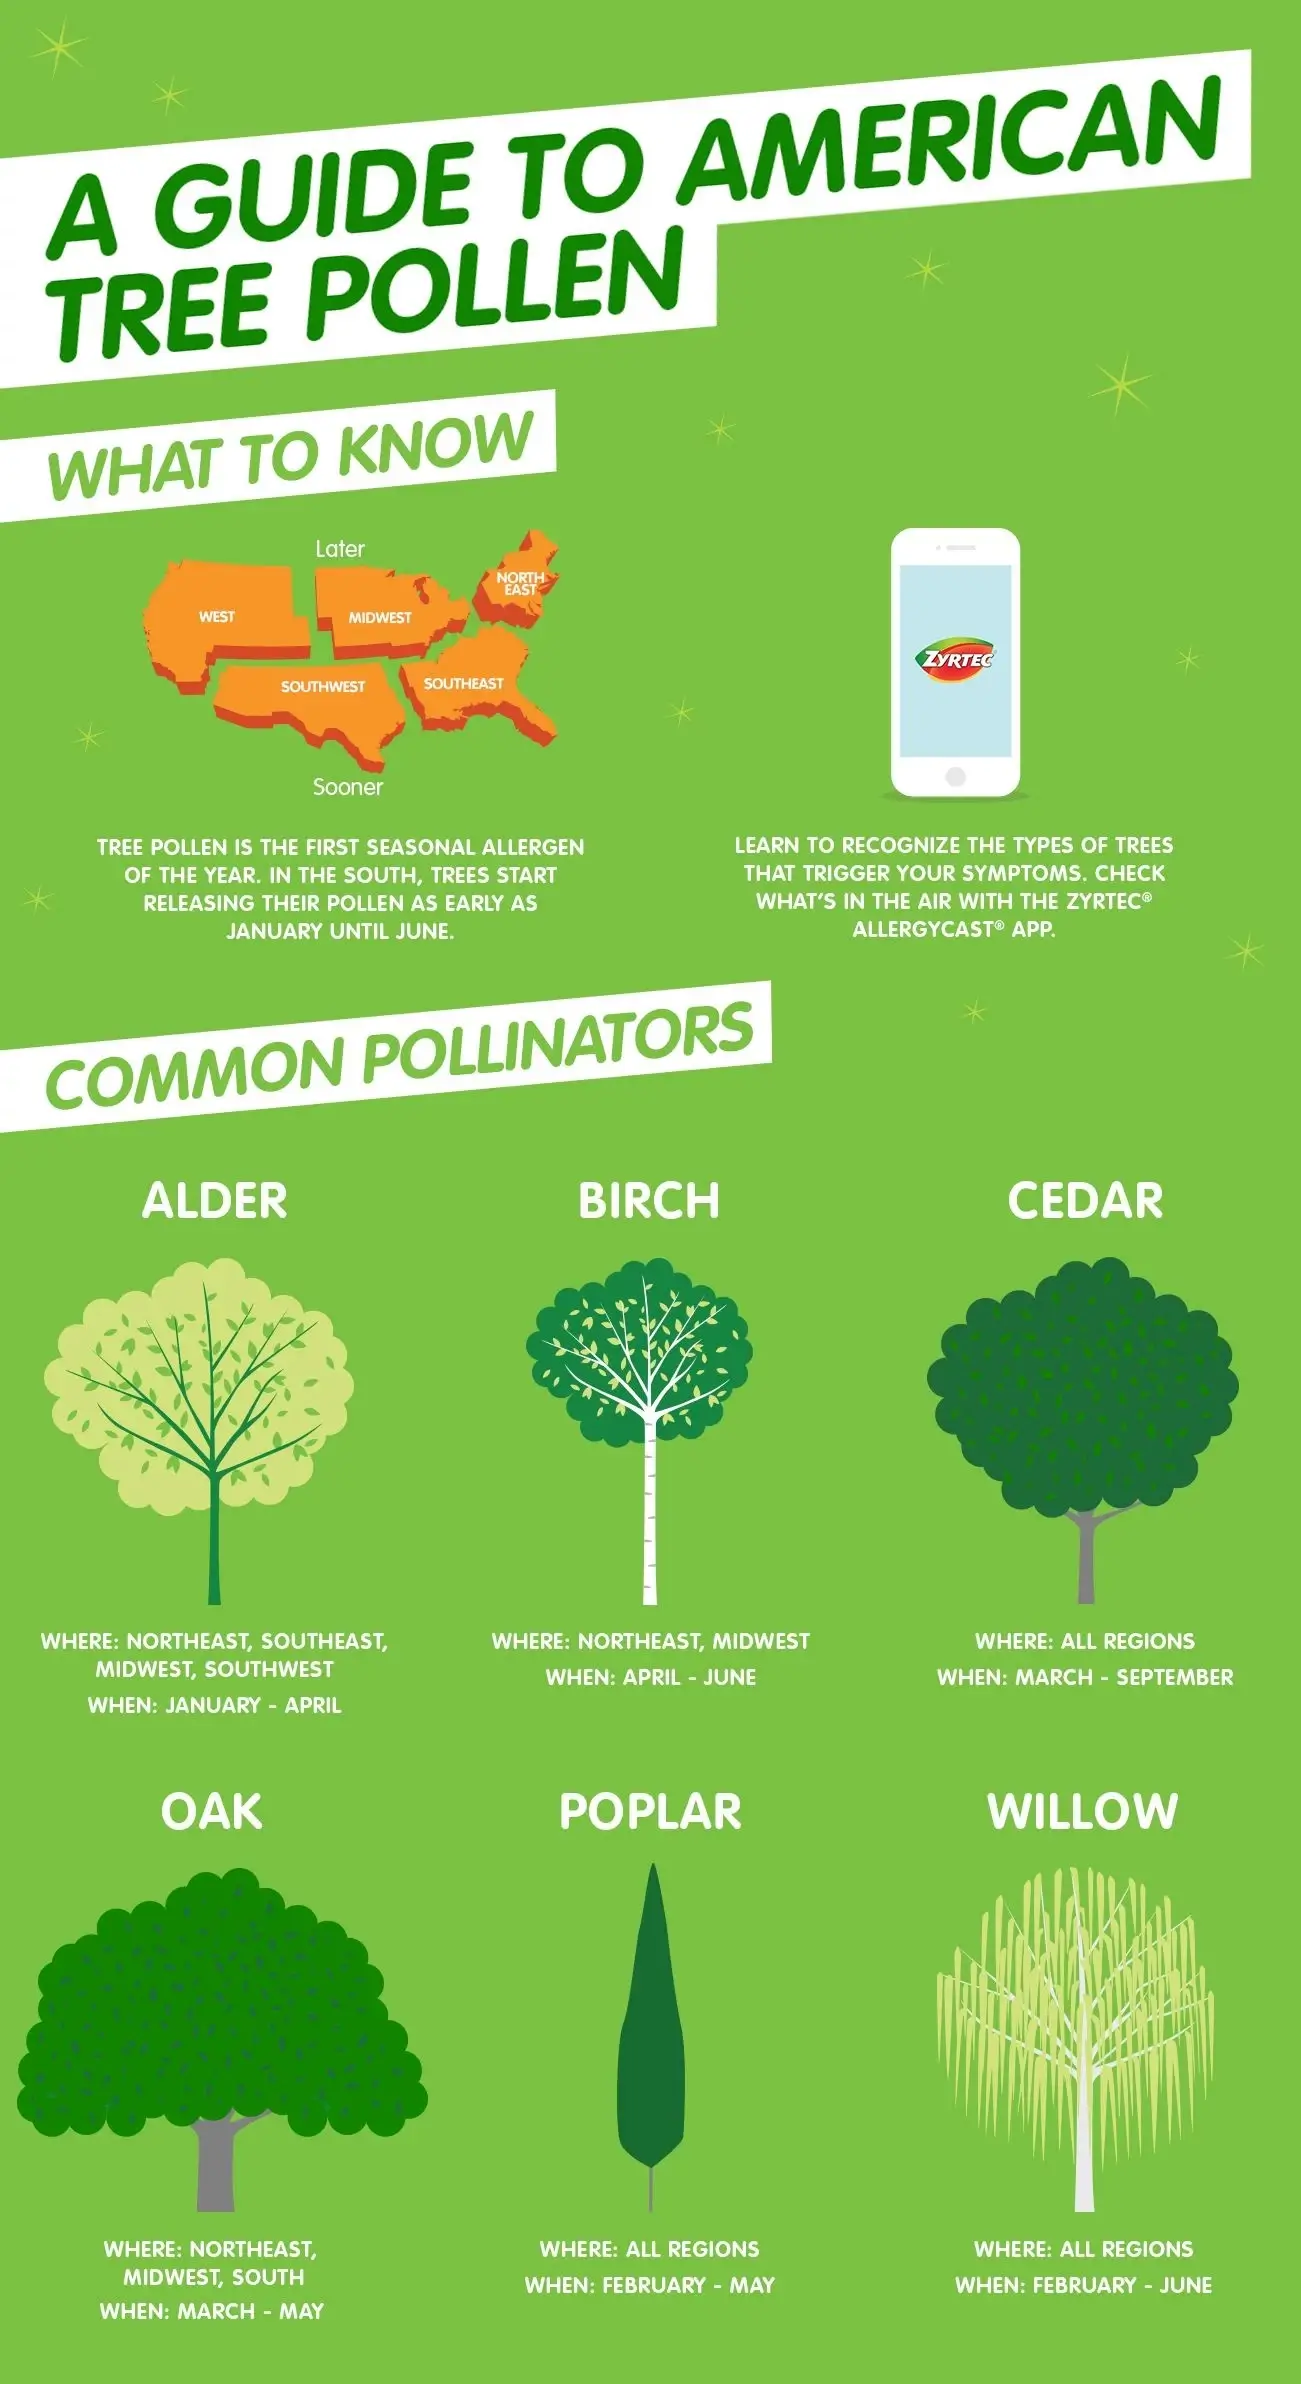 Tree pollen infographic titled "a guide to American tree pollen"